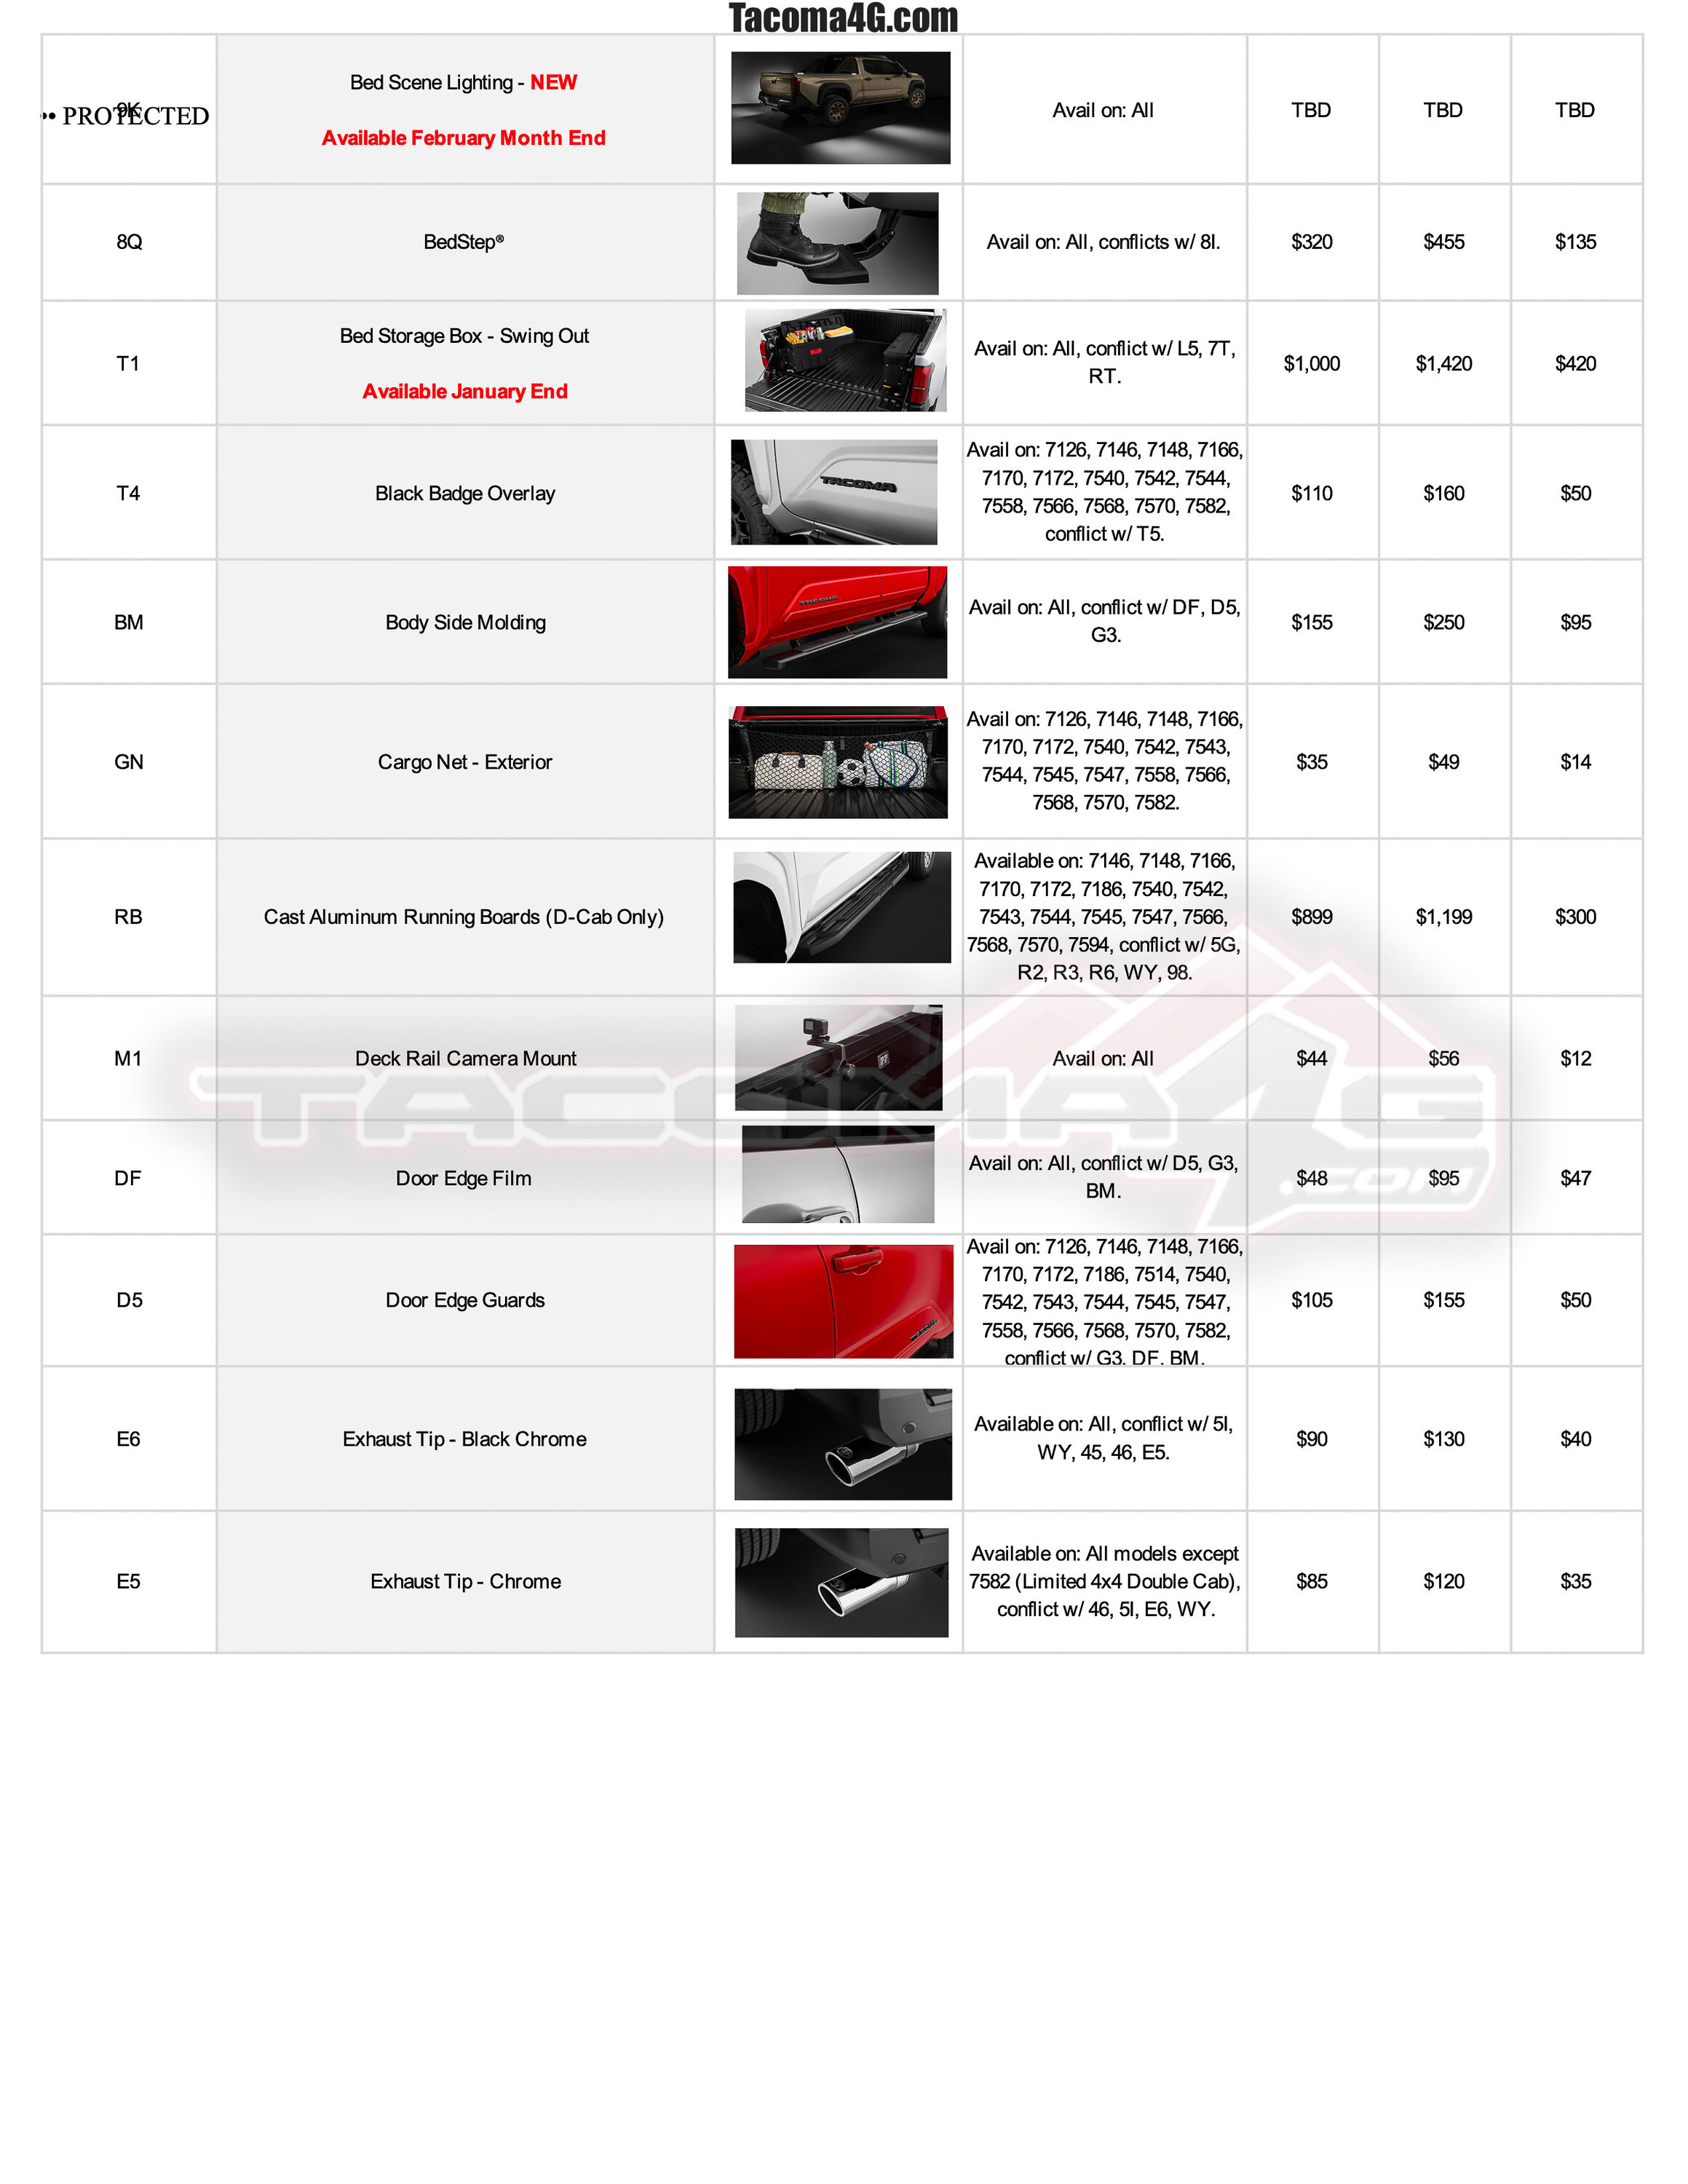 2024 Tacoma 2024 Tacoma Post-Production Options (PPO) Guide - OEM / TRD Accessories Parts + Pricing!  [UPDATED 4-24-24] 2024 Tacoma PPO Accessories Guide_02.09.24-2